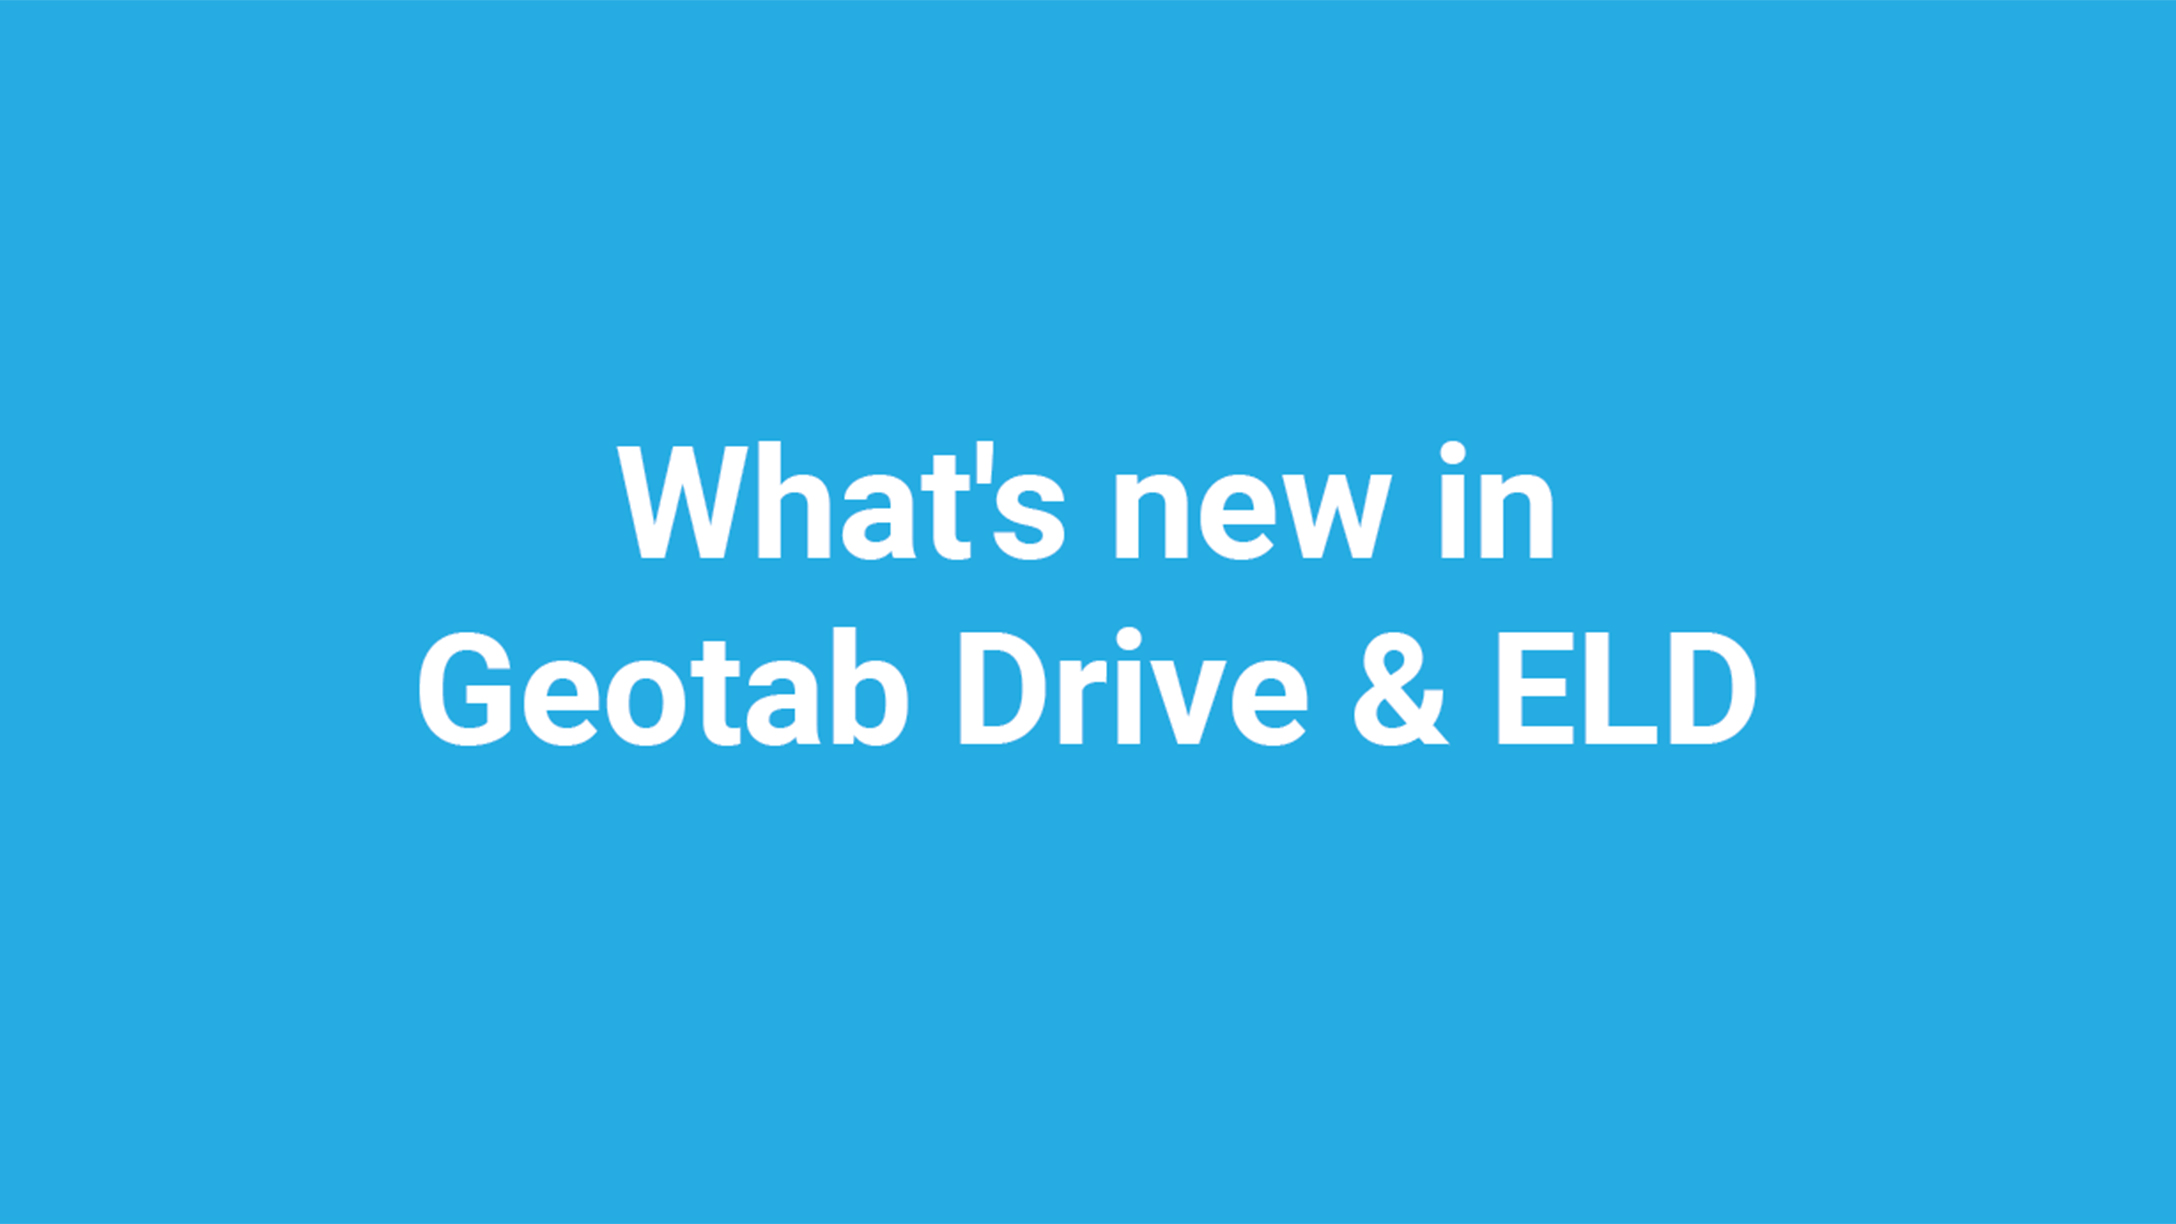 "What’s new in Geotab Drive & ELD" in a white font with a baby blue background